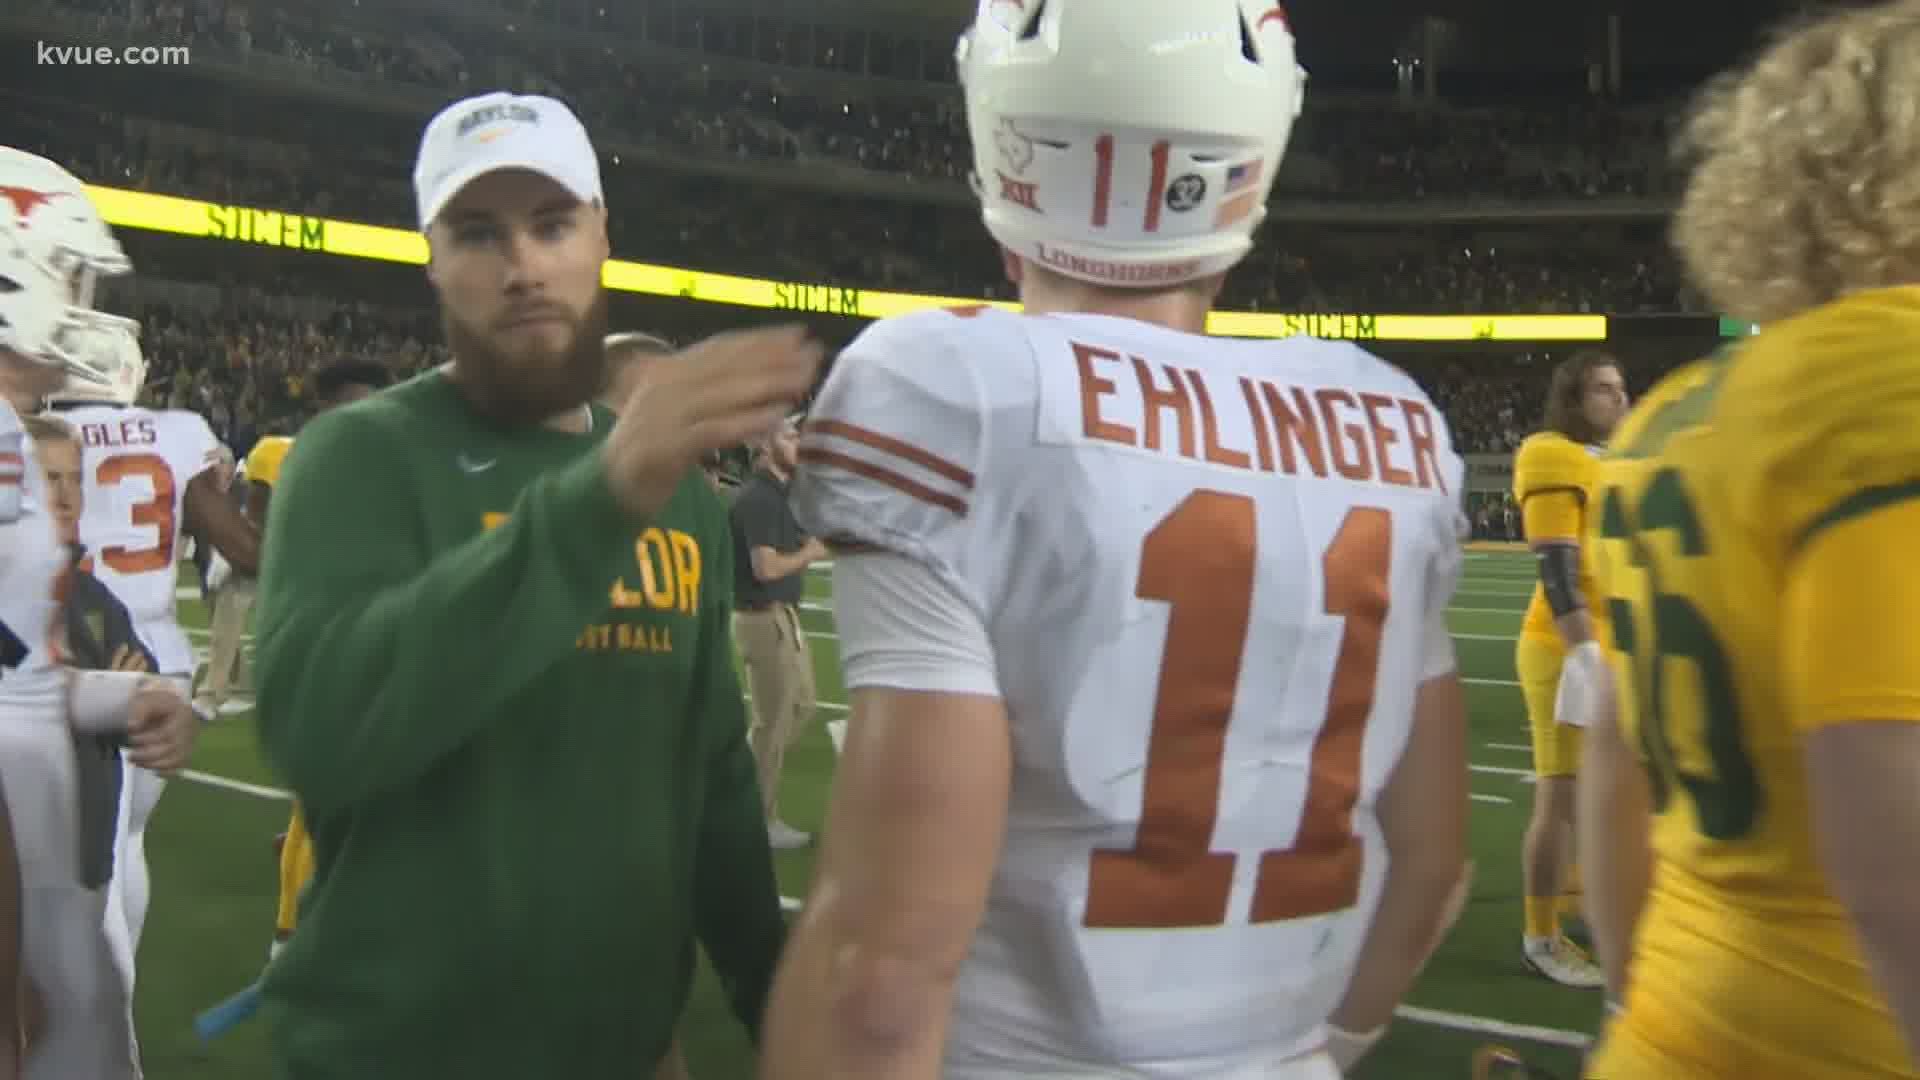 Baylor Bears' starting quarterback Charlie Brewer is a former Lake Travis star with ties to the UT program – including a high school rivalry against Sam Ehlinger.